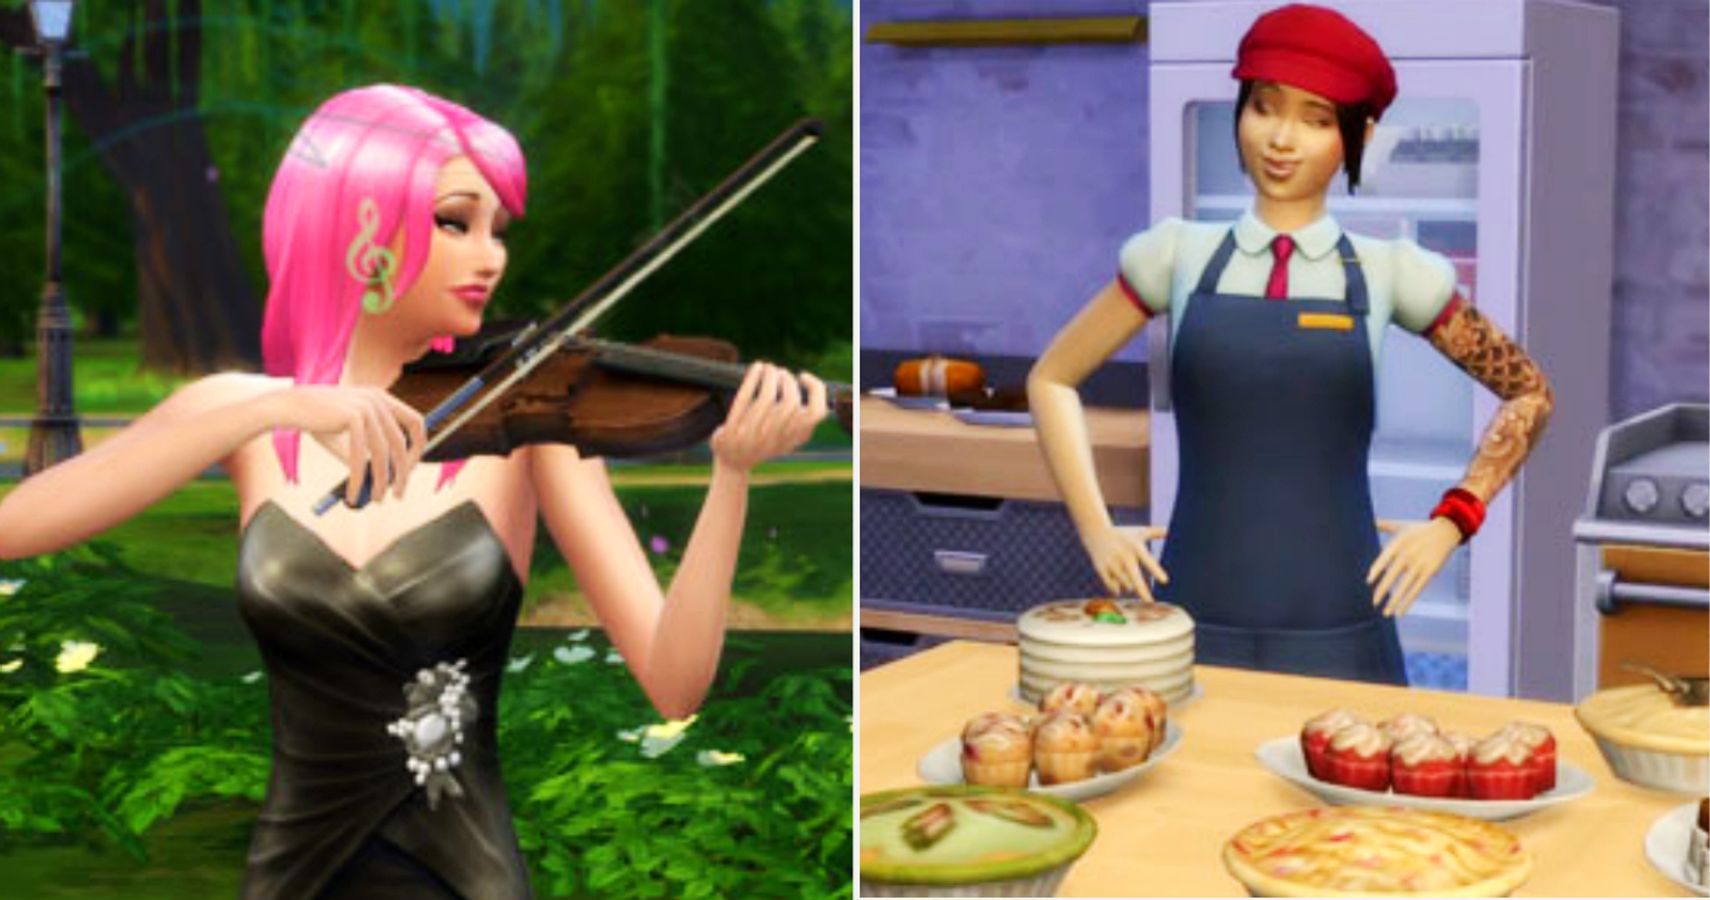 The Sims 4: How To Make Money (without Resorting To Cheats)